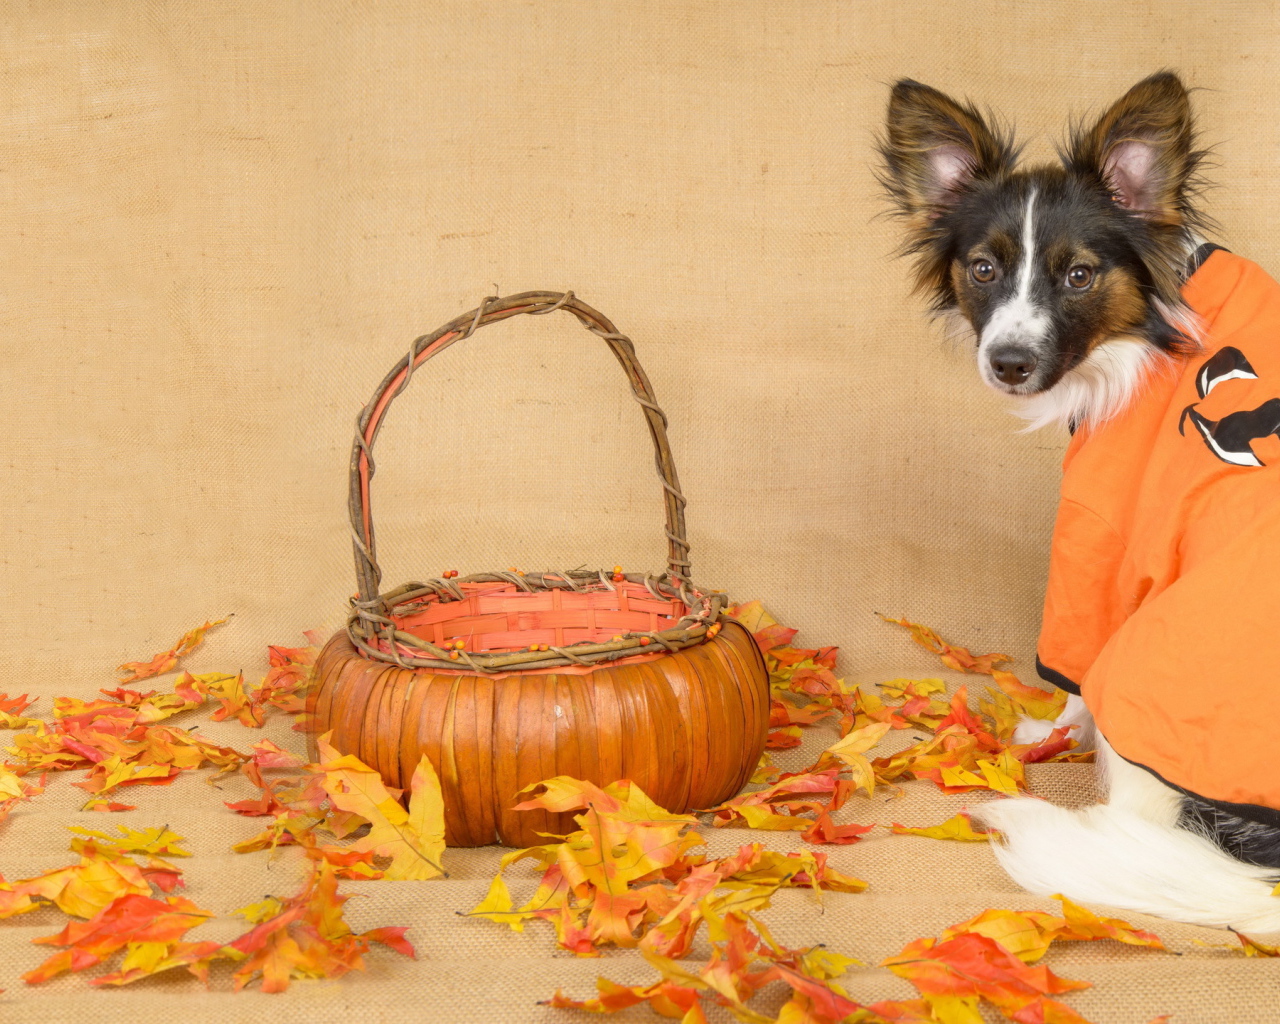 Dog with basket and fallen leaves